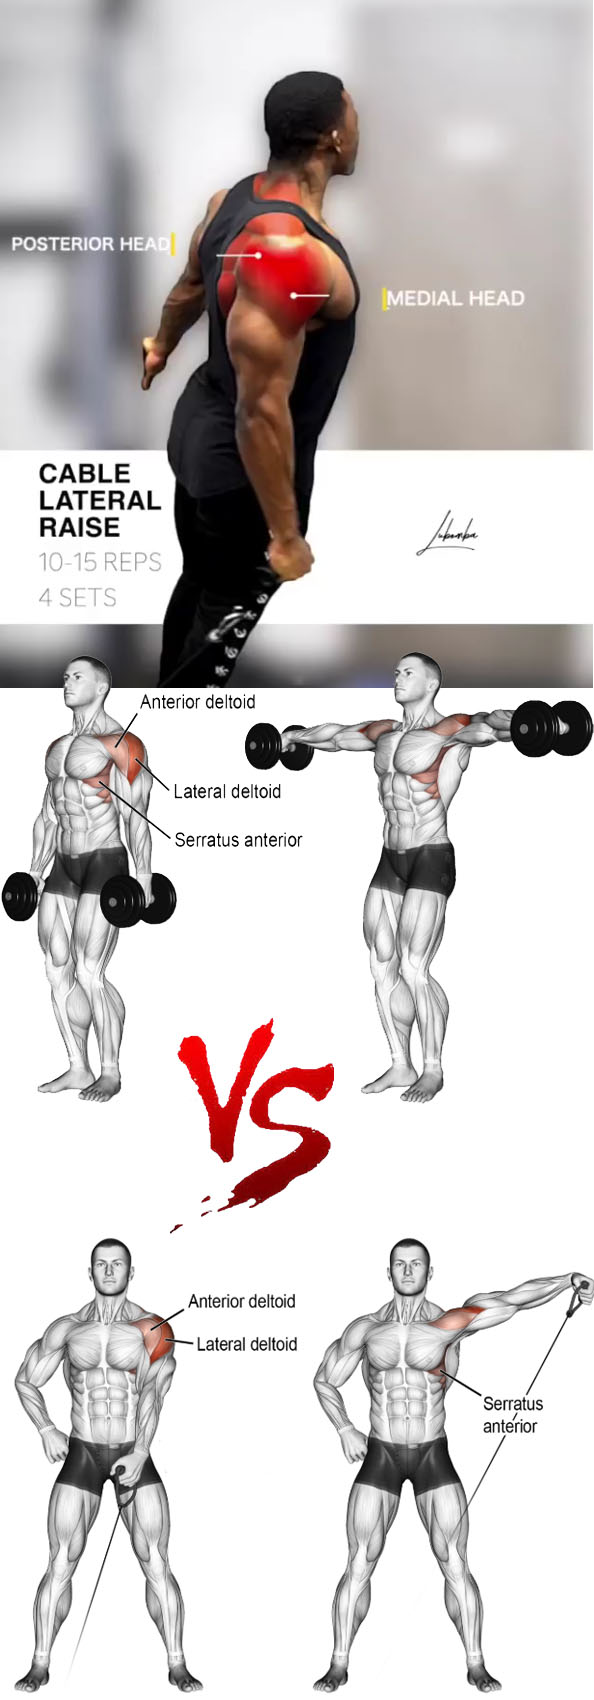 Cable Lateral Raise